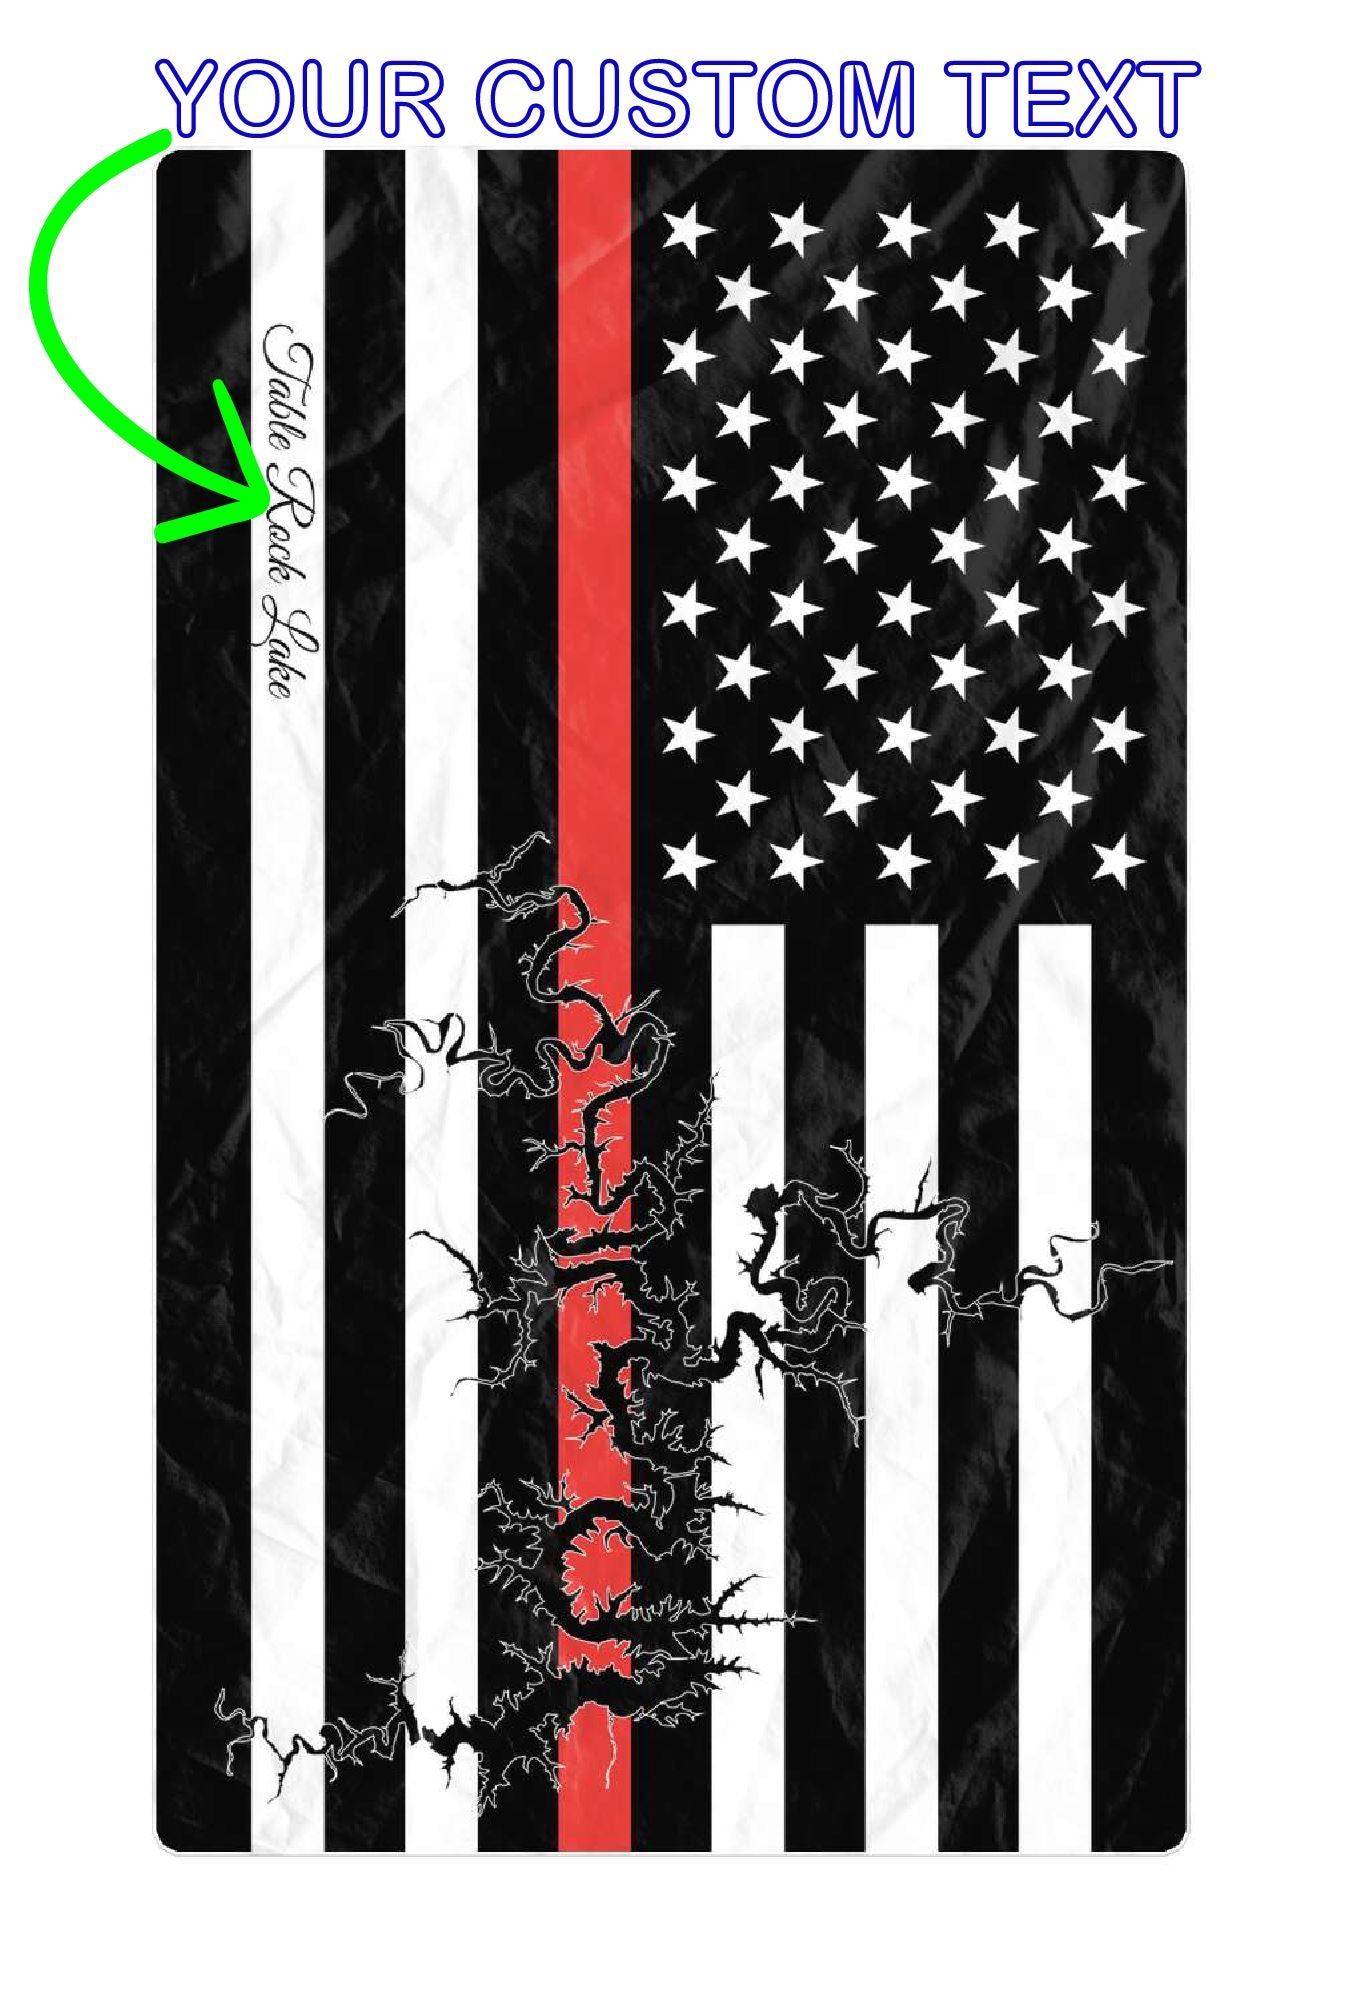 Table Rock Lake Oversized Beach Towel - Thin Red Line – Personalized Freeform Beach Towel - AOP 